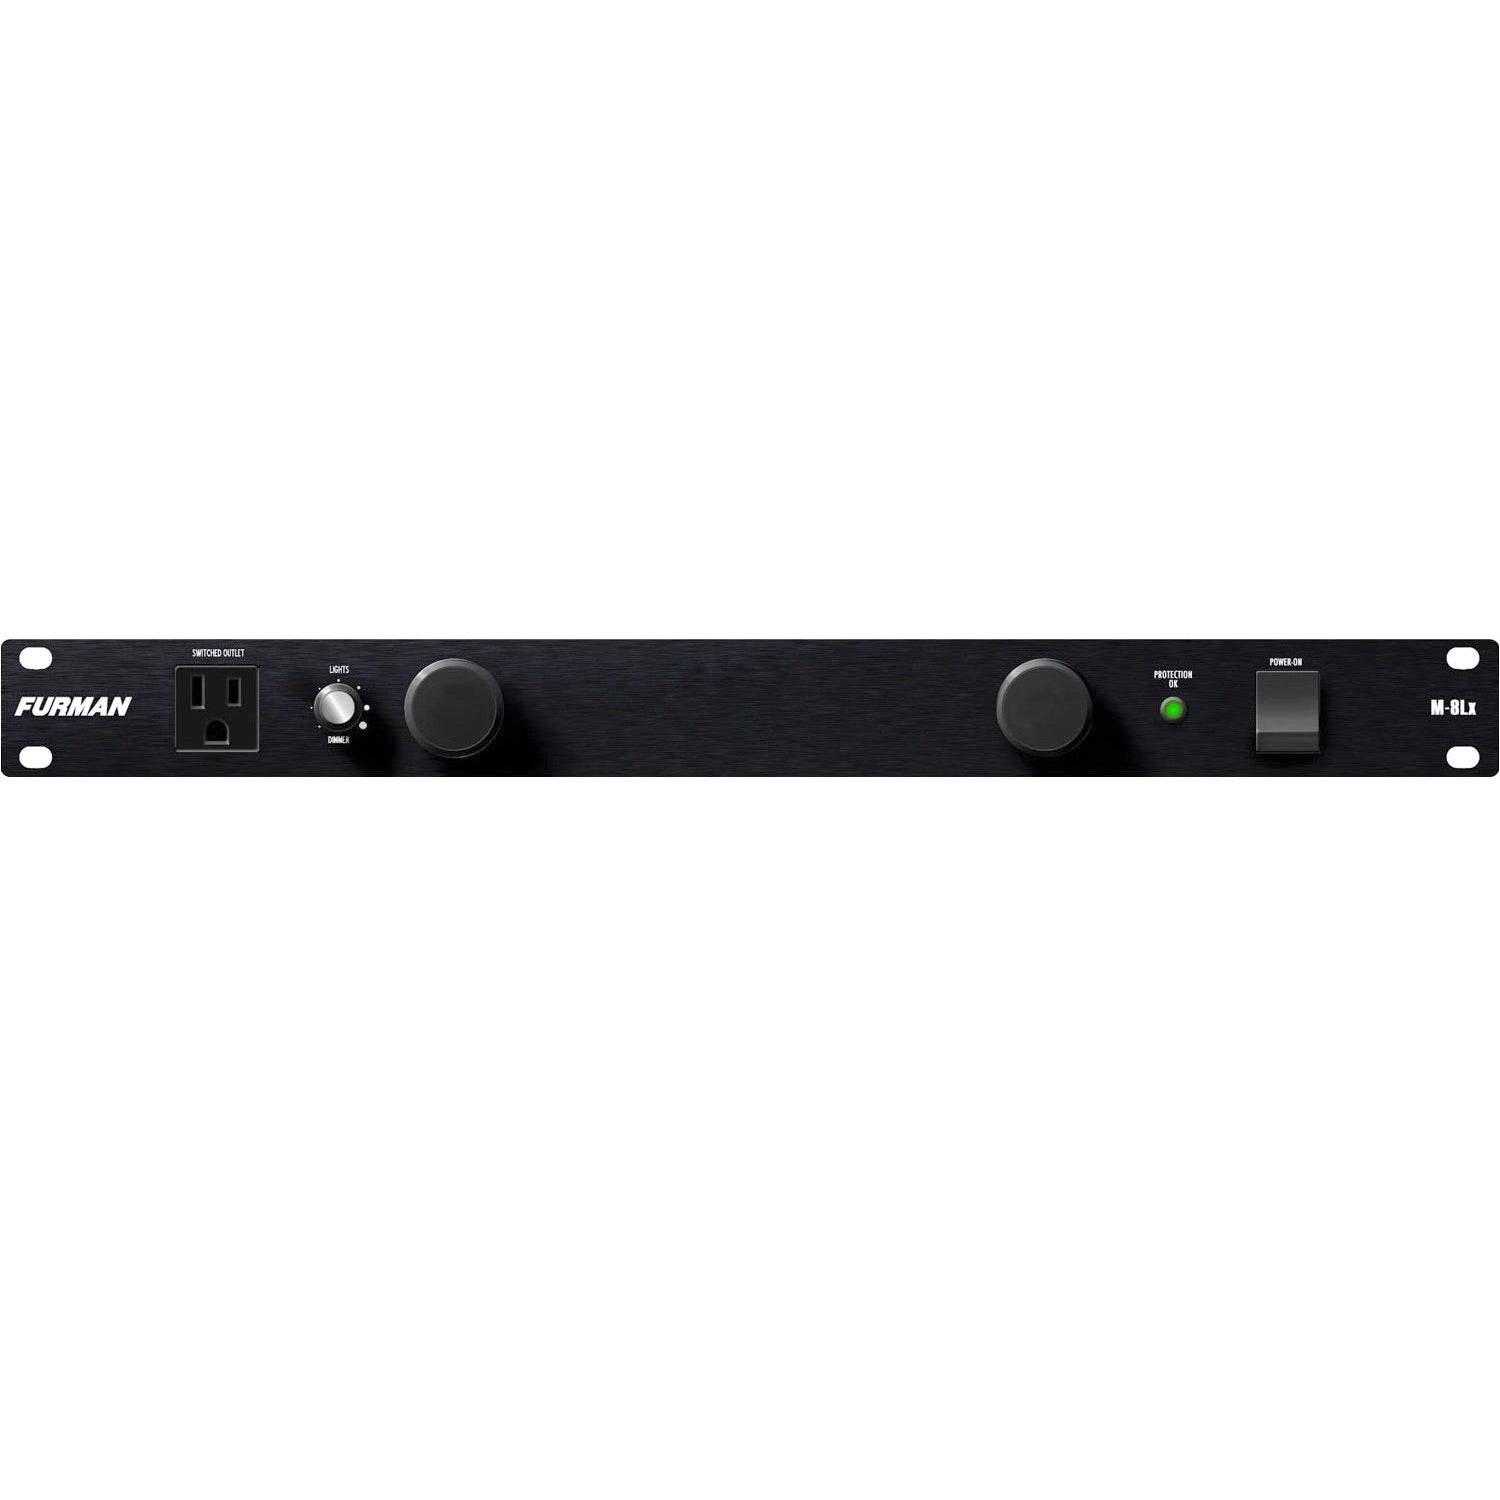 Furman M-8Lx - 15A Power Conditioner with Lights, front